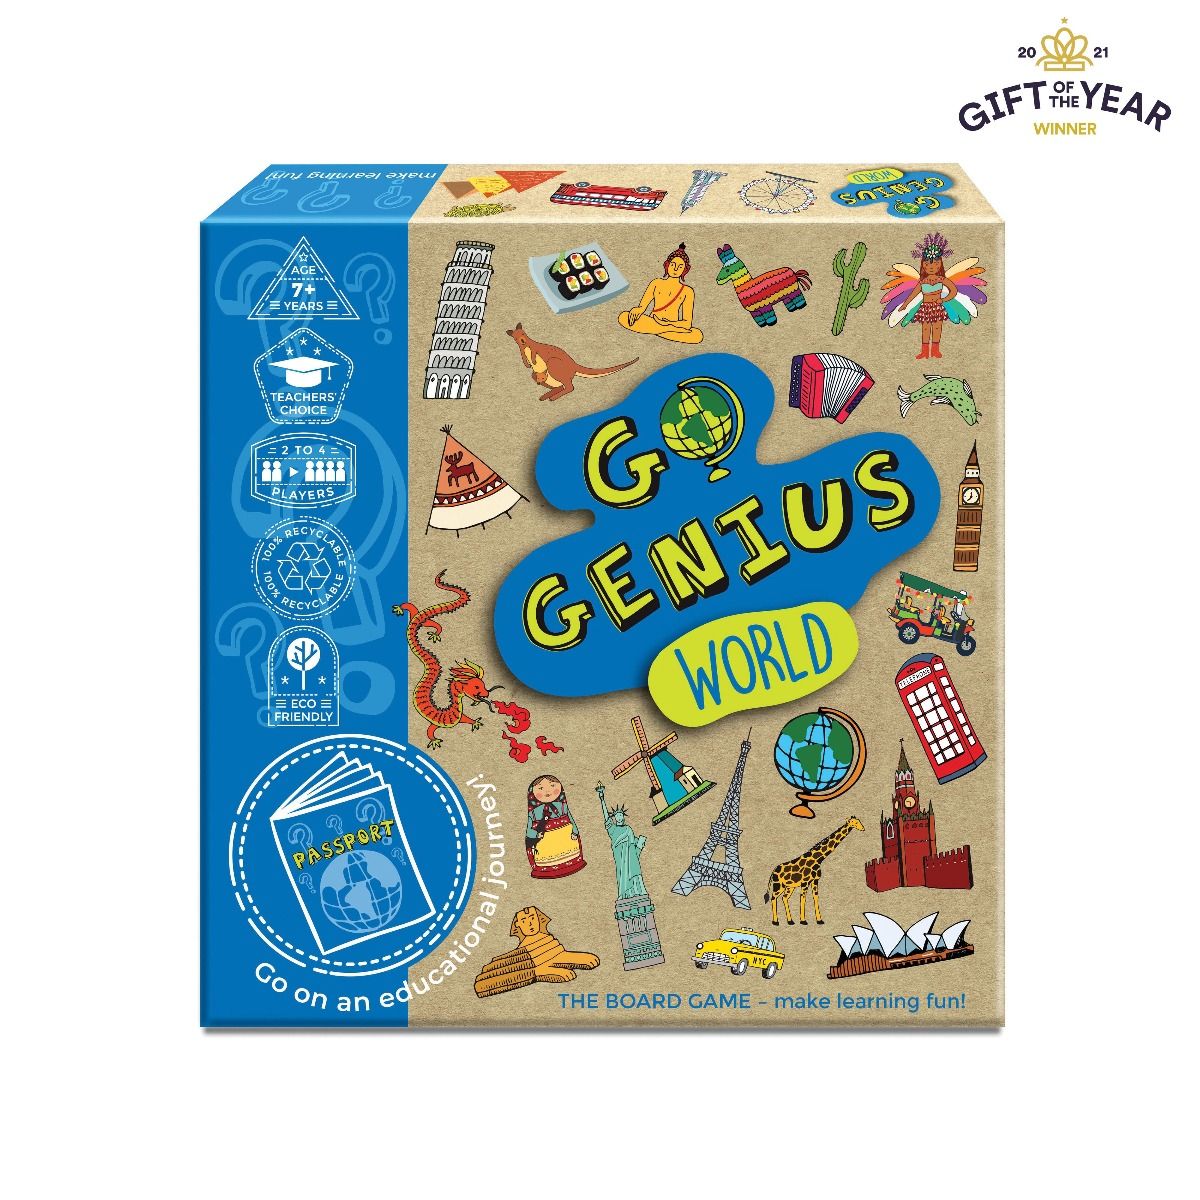 Go Genius World - The Board Game - Gifts R Us